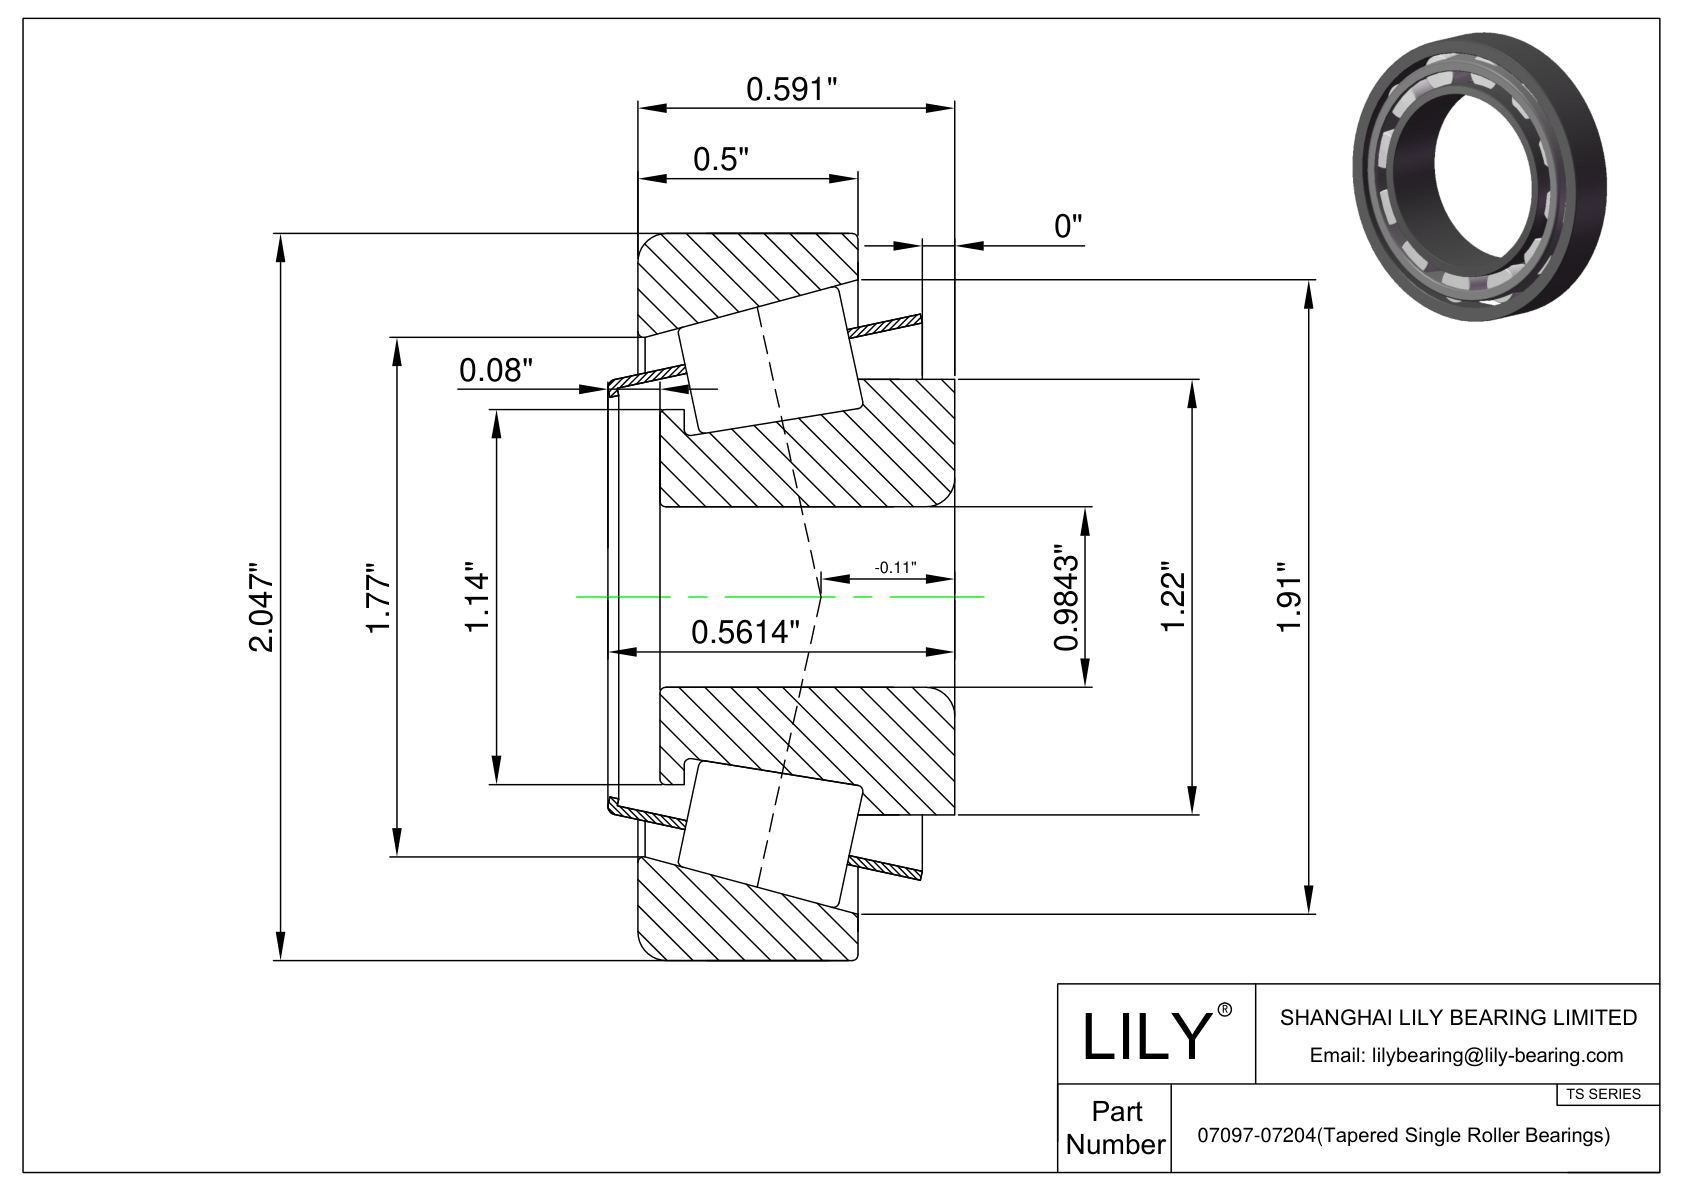 07097-07204 TS (Tapered Single Roller Bearings) (Imperial) cad drawing